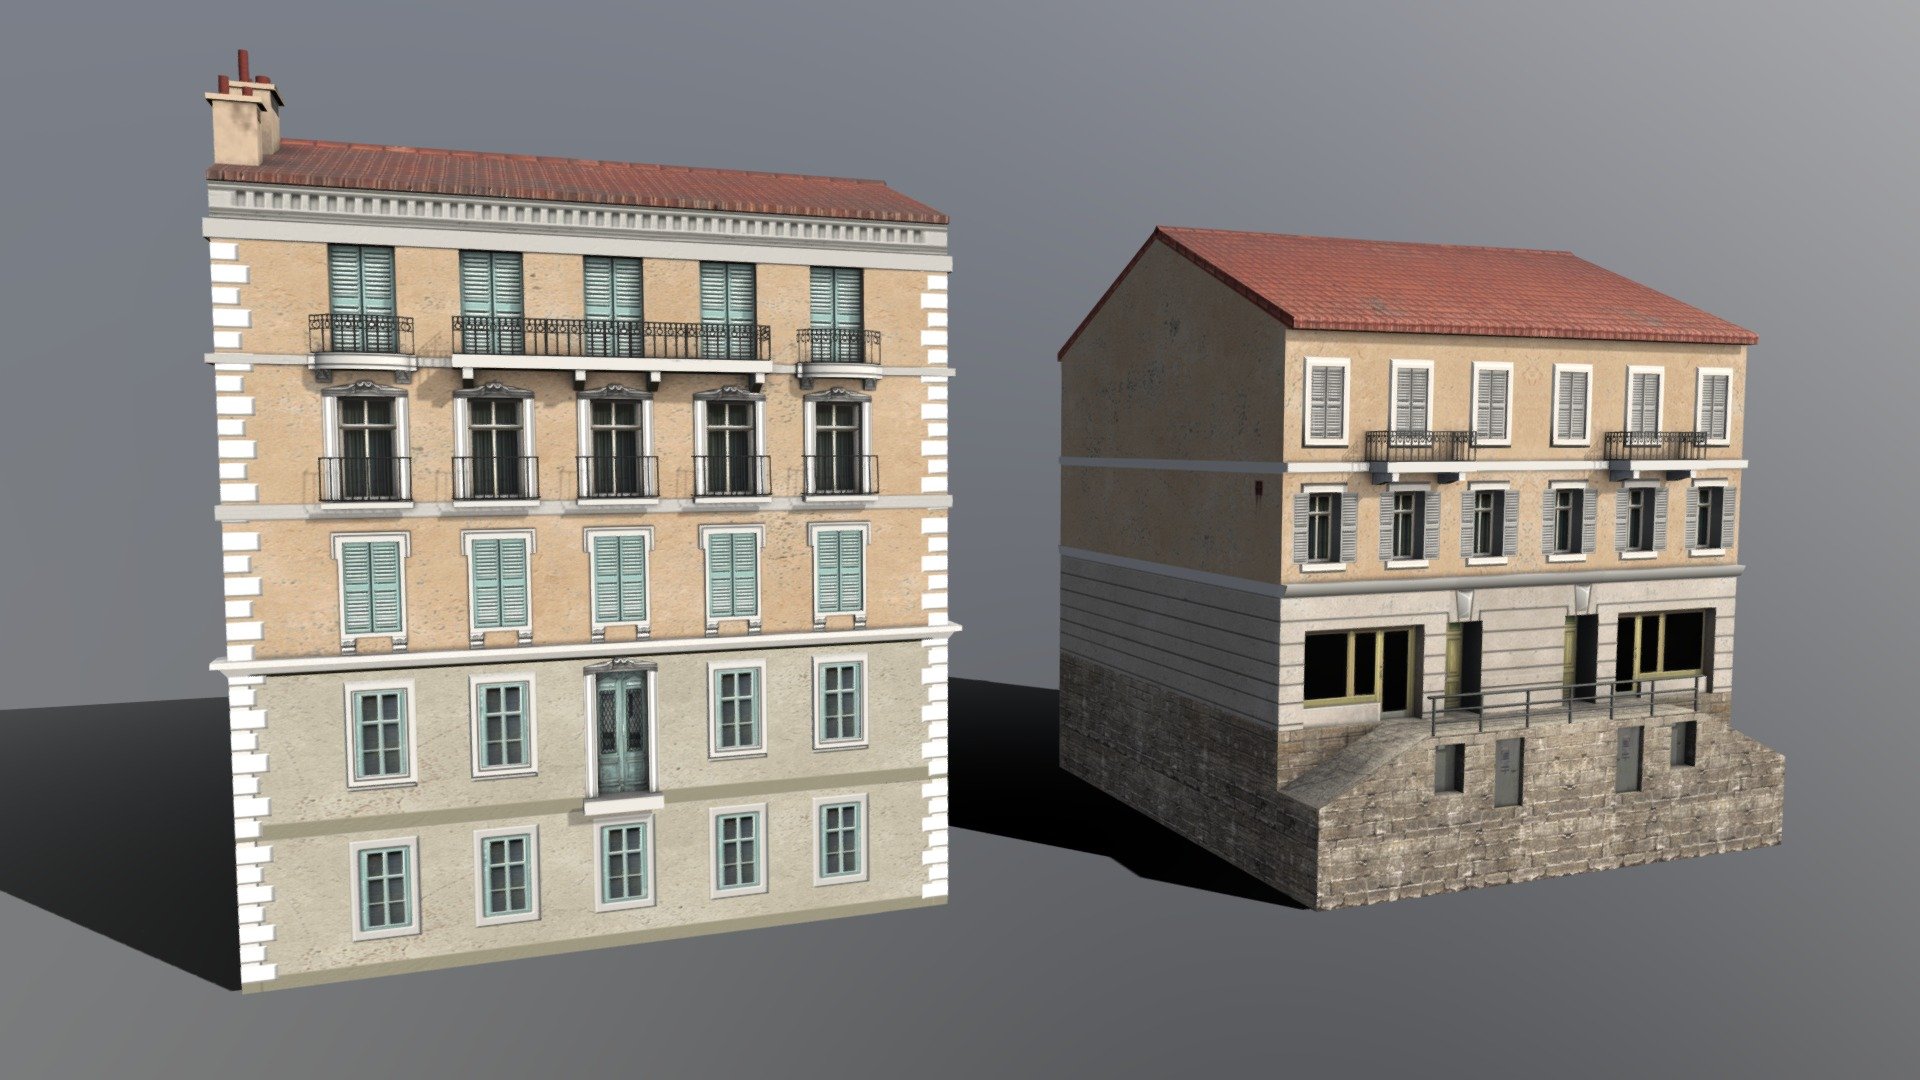 Two buildings from Monaco, a shop and a residential block. Both were originally built for use as mod assets for the game Cities:Skylines, so they have an appropriate level of detail for viewing at a distance. 

2048^2 texture set included for each building (color/normal/roughness/alpha) 3d model